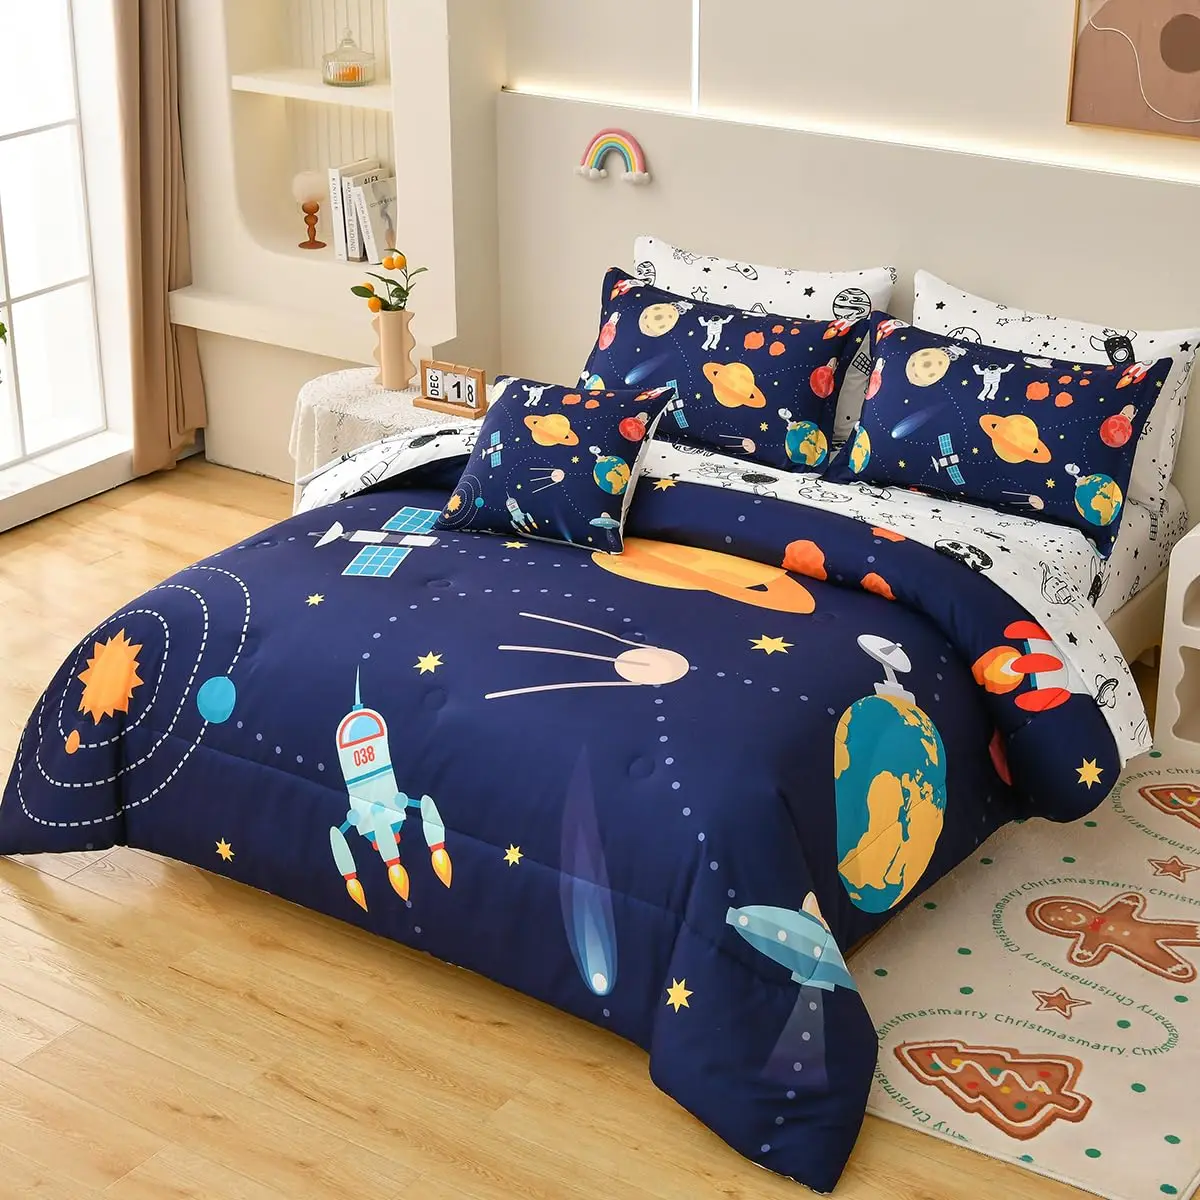 

Astronaut Duvet Cover Set Queen Size, Outer Space Bedding Set 3pcs for Kids Girls Adults,Comforter Cover Soft with 2 Pillowcases